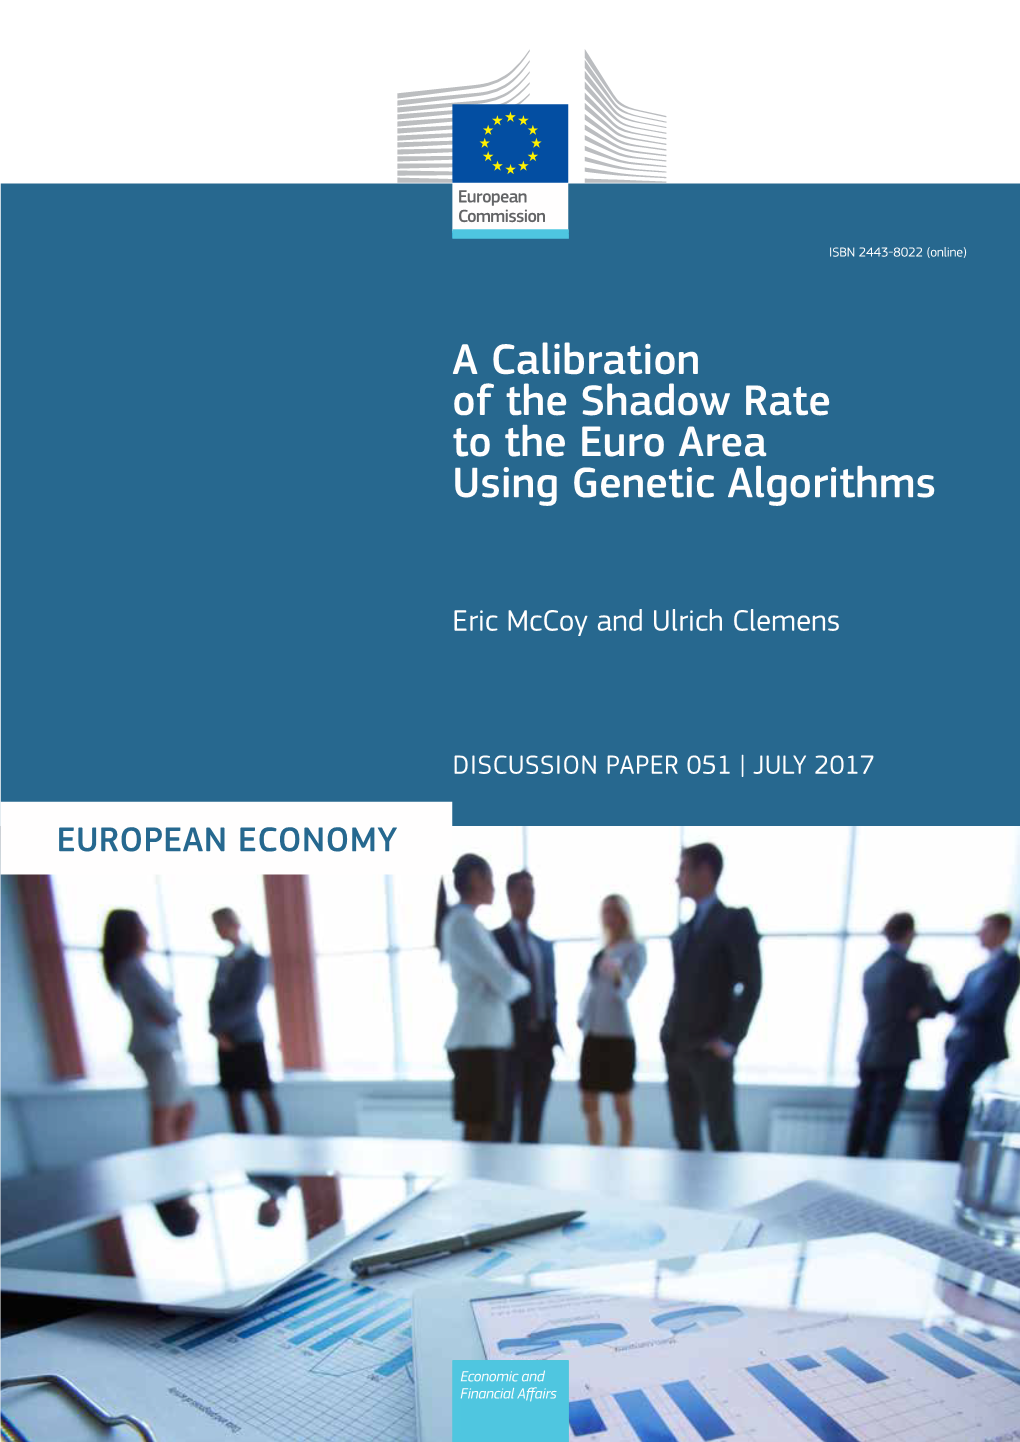 A Calibration of the Shadow Rate to the Euro Area Using Genetic Algorithms